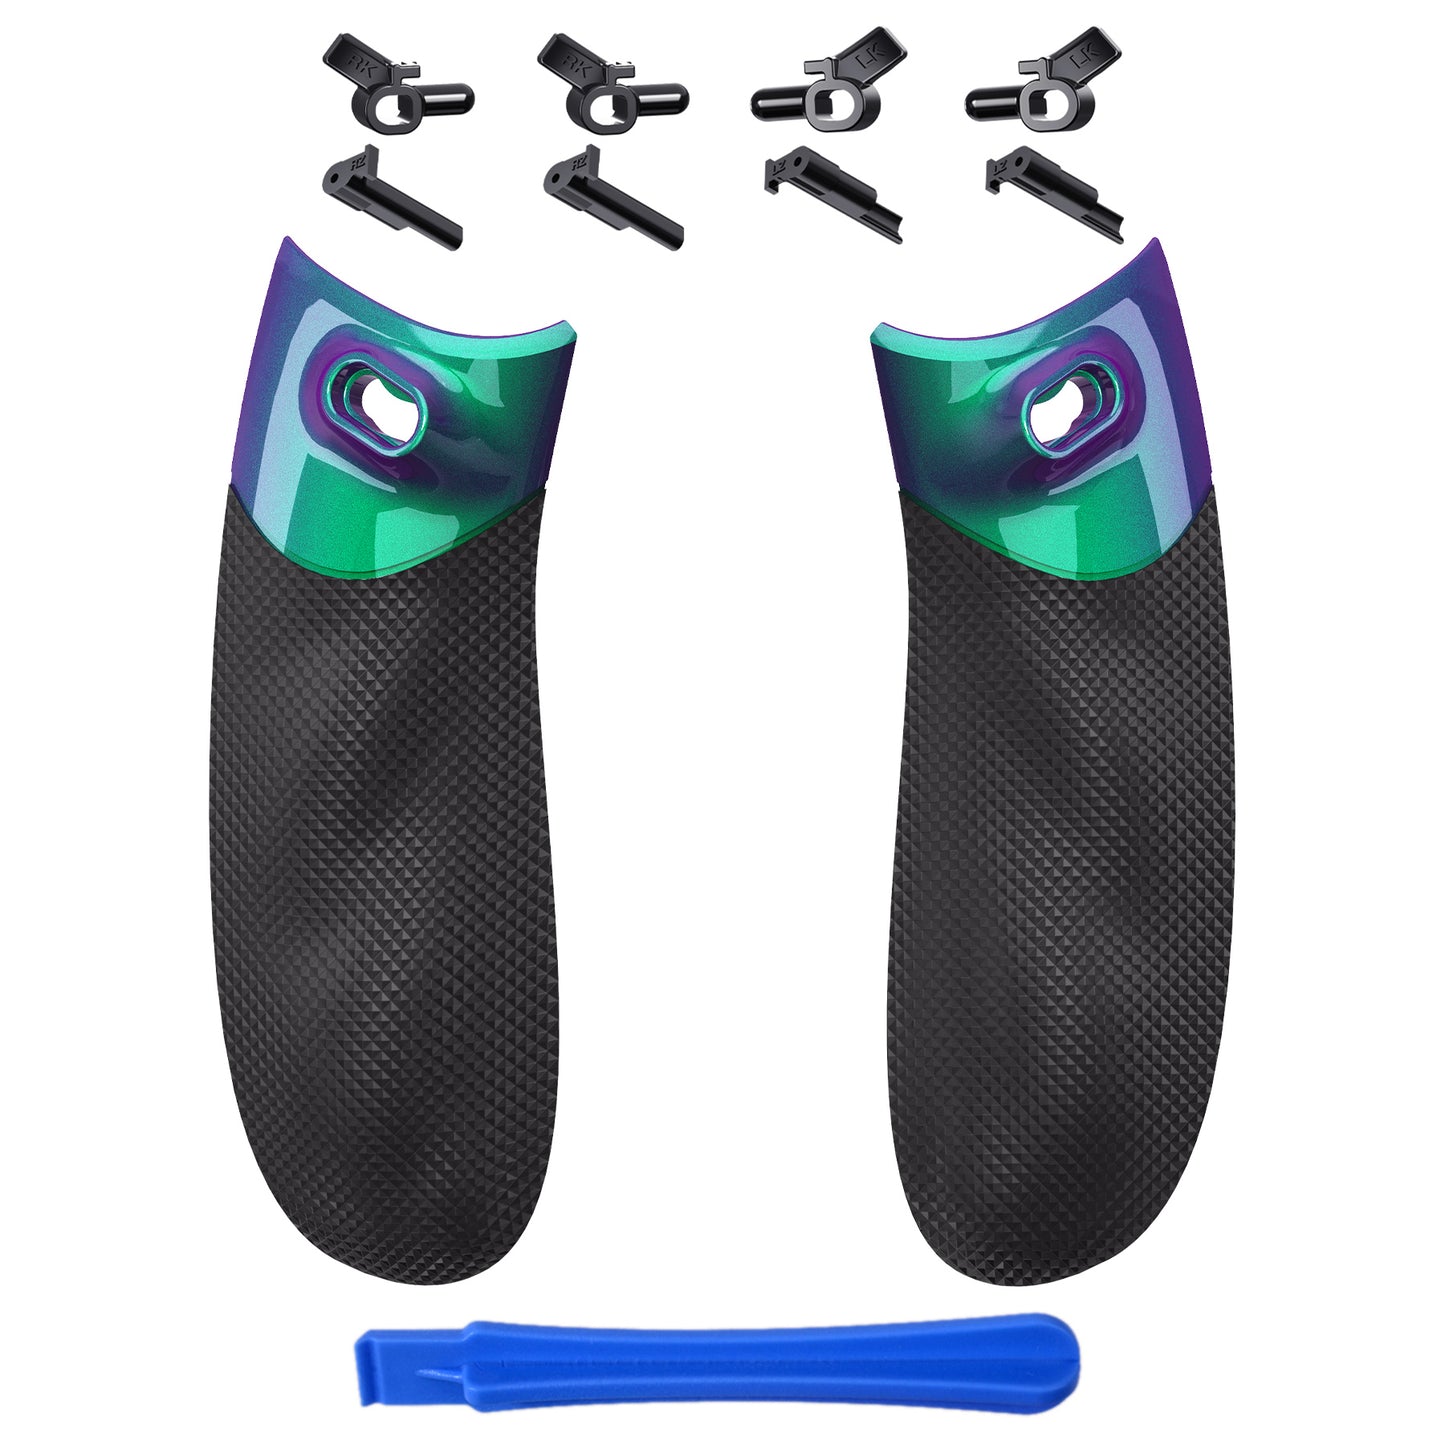 eXtremeRate FLEXOR Rubberized Side Rails Grips Trigger Stop Kit for Xbox Series X/S Controller & Xbox Core Controller - Chameleon Green Purple eXtremeRate